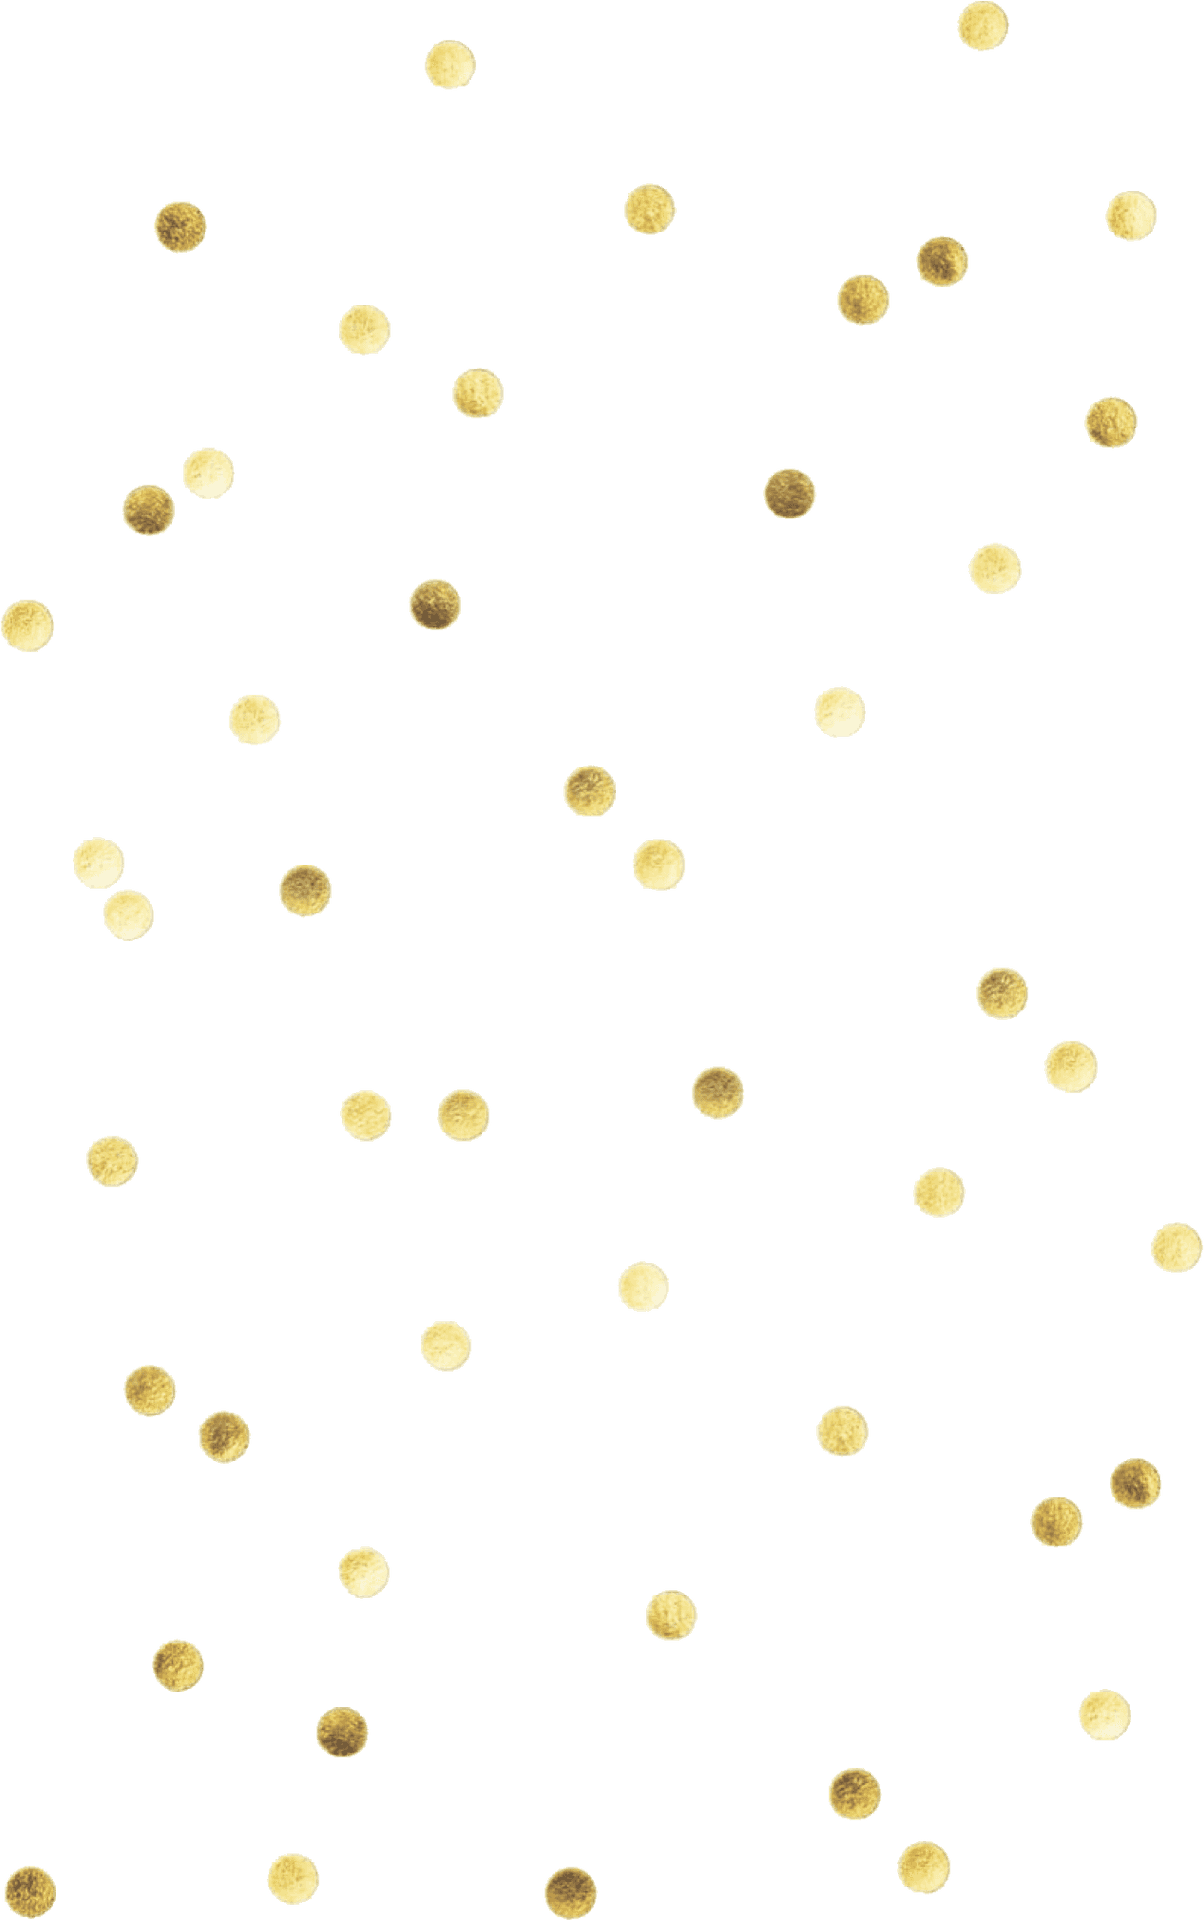 Golden Dots Patternon Teal Background PNG